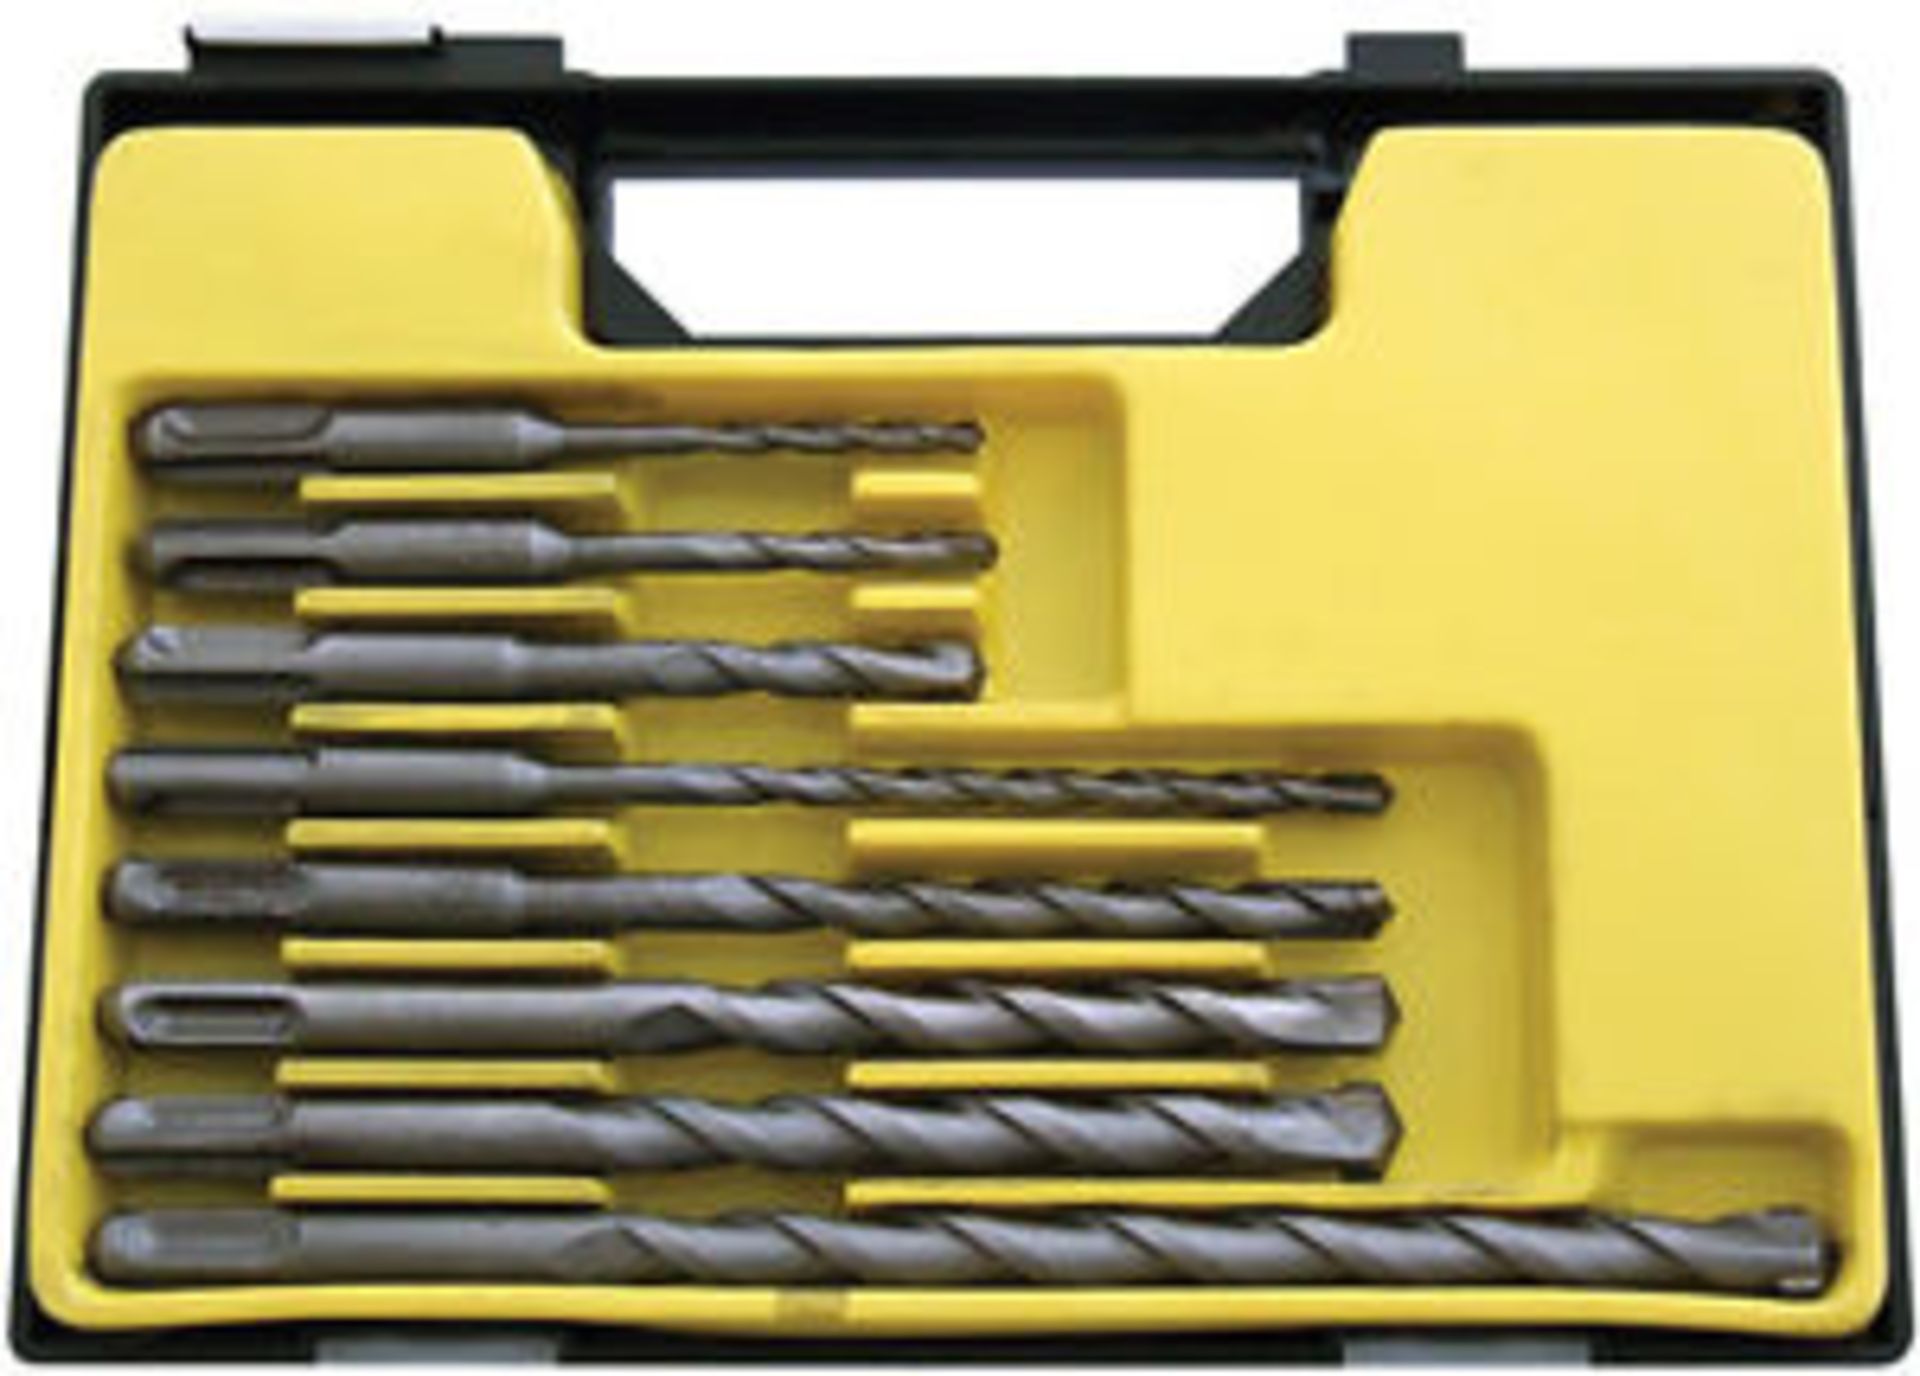 V Brand New 8 Piece SDS Drill Bit Set with Brazed TCT Tips and Storage Case X 2 YOUR BID PRICE TO BE